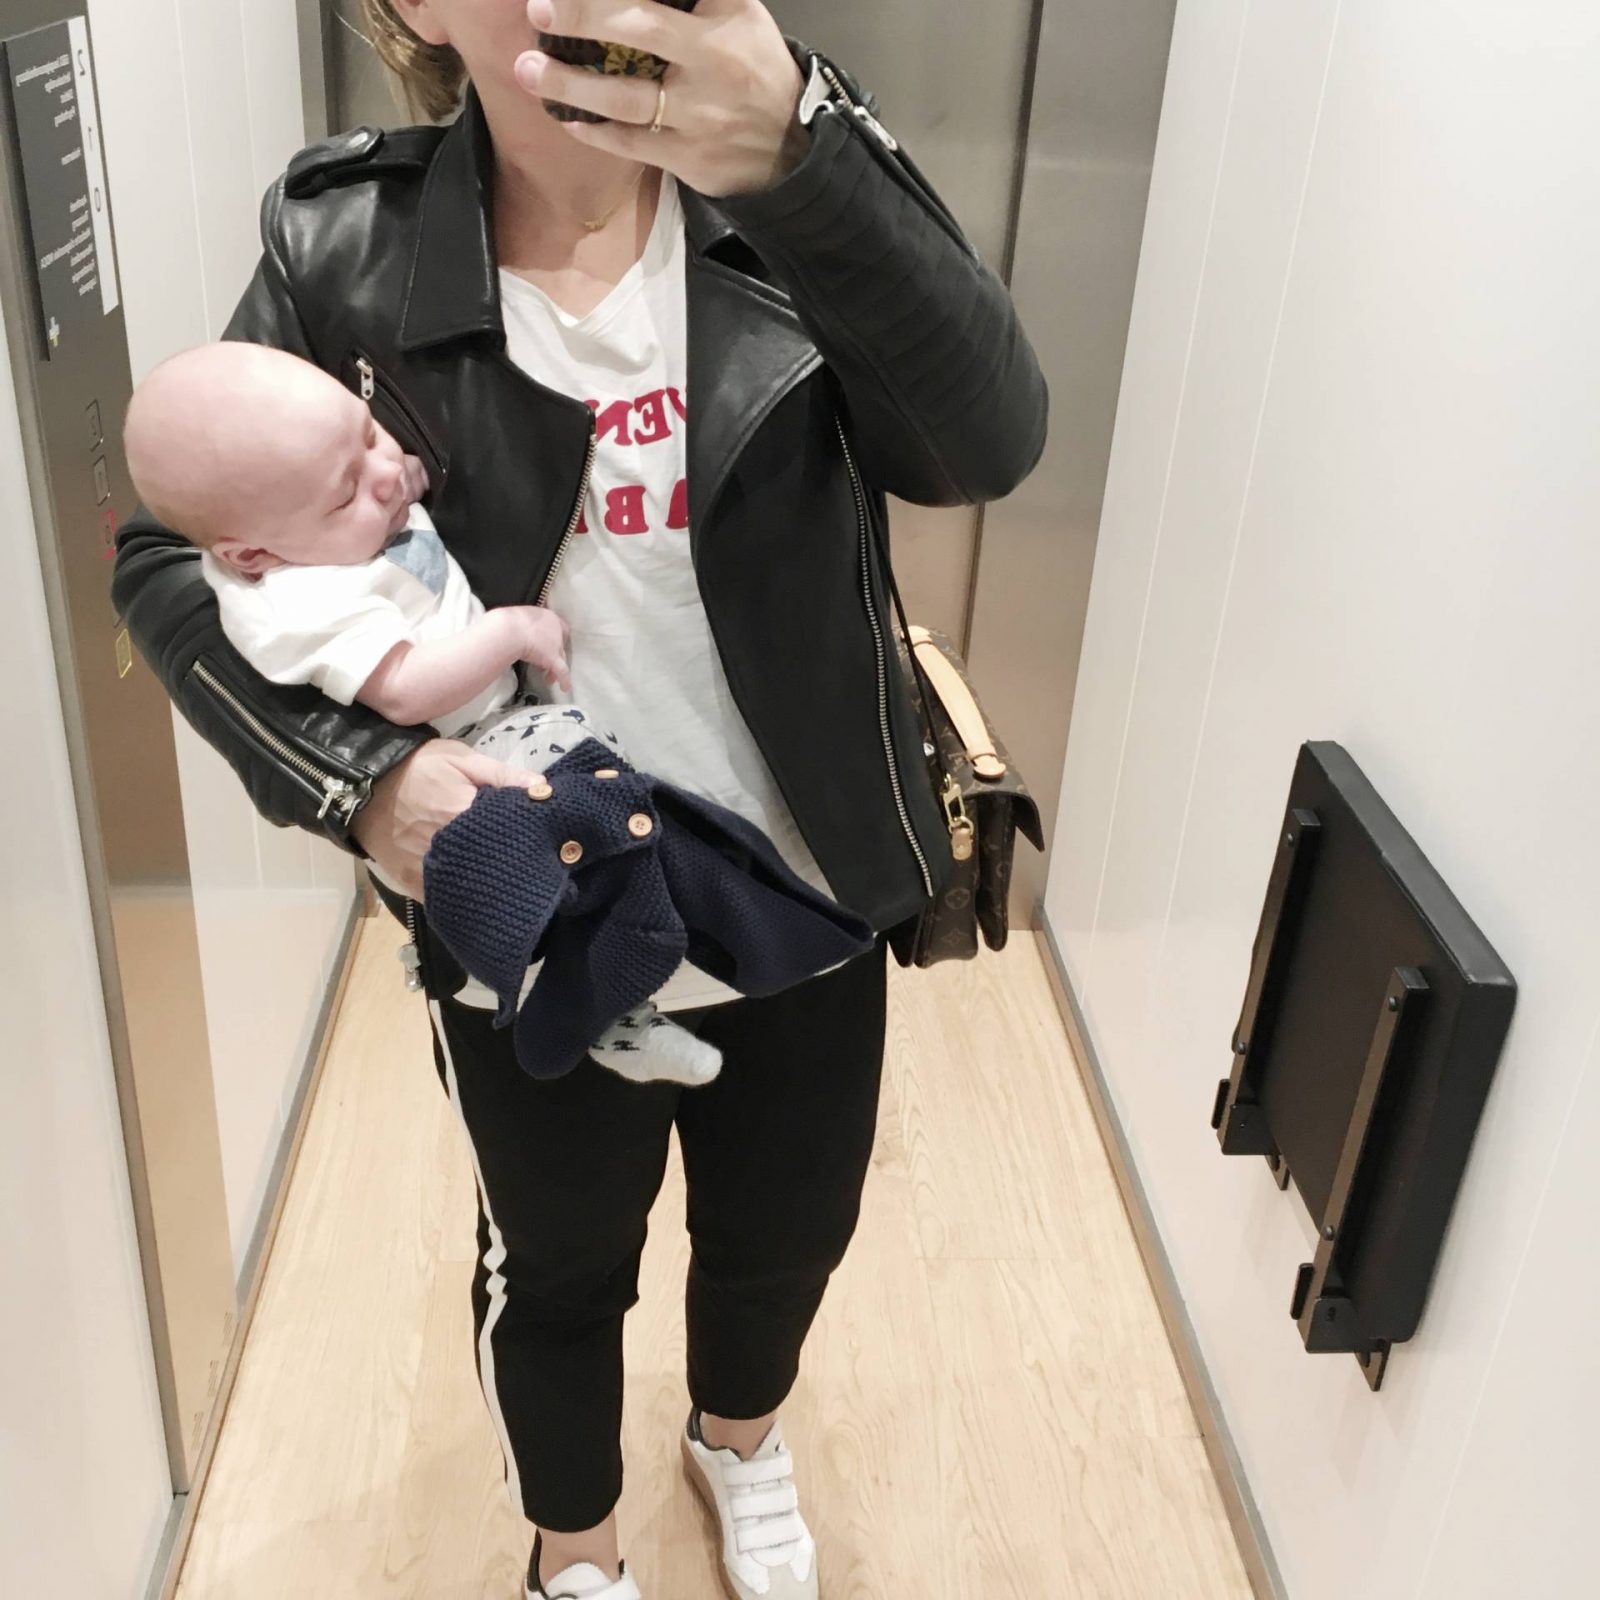 Mom’s week in outfits #1